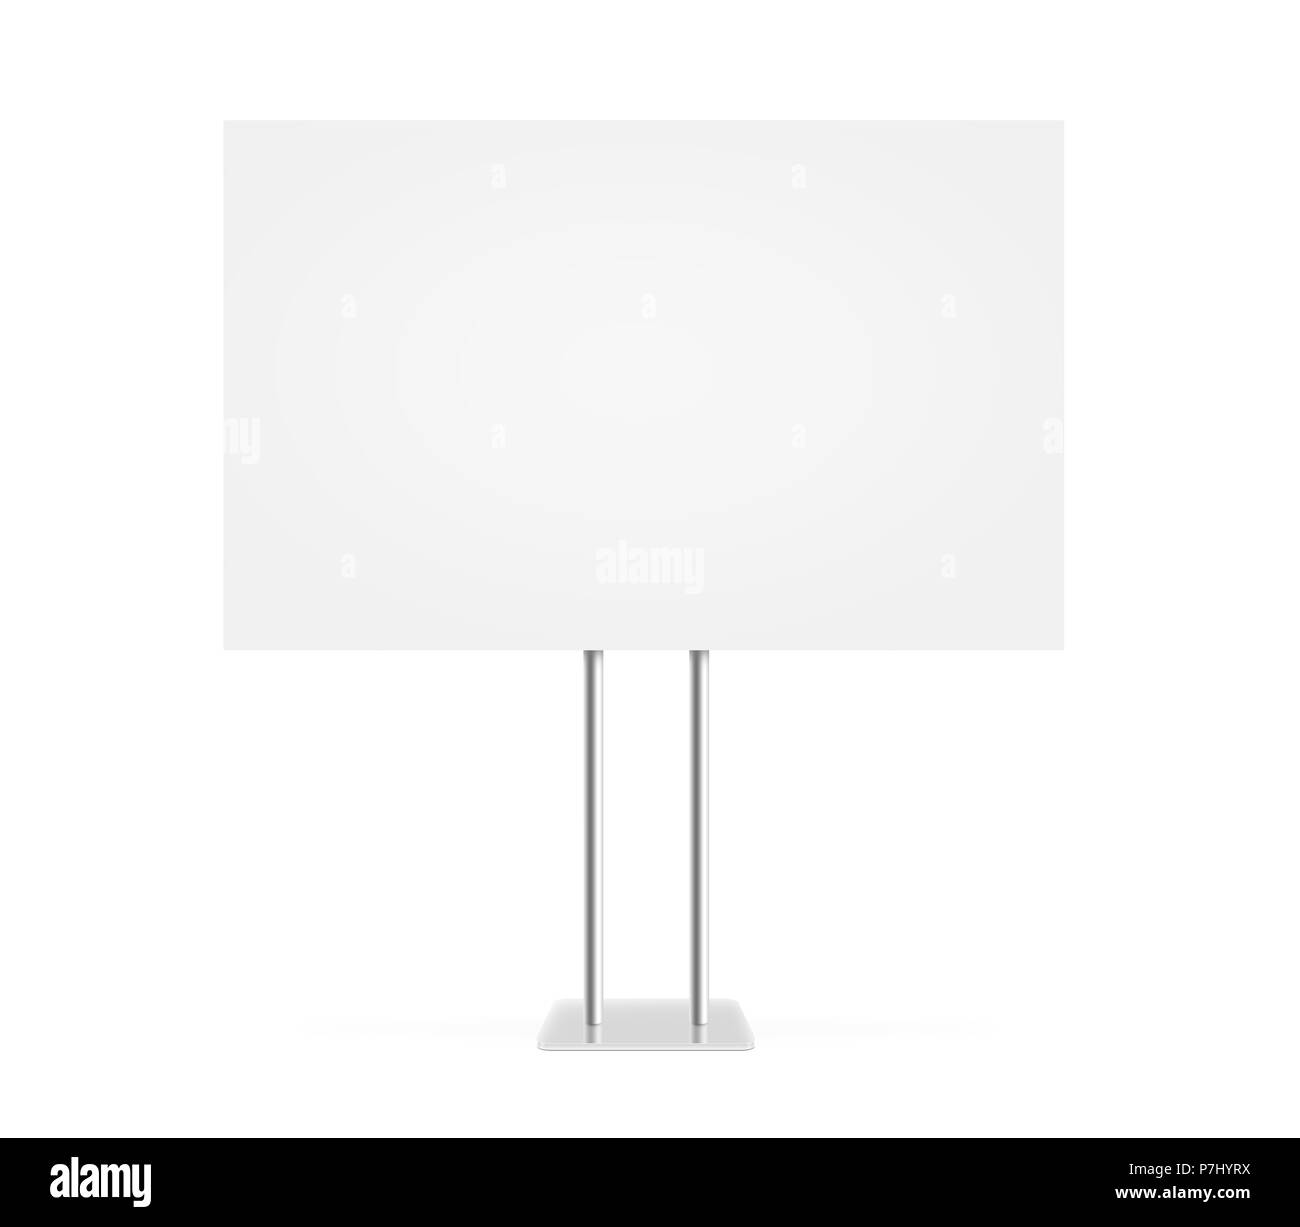 Information board mock up stand isolated. Billboard mockup. Support table. Stand on white background. Blank signage stand. Clear plain banner stand. Empty plate plank panel display. Stock Photo